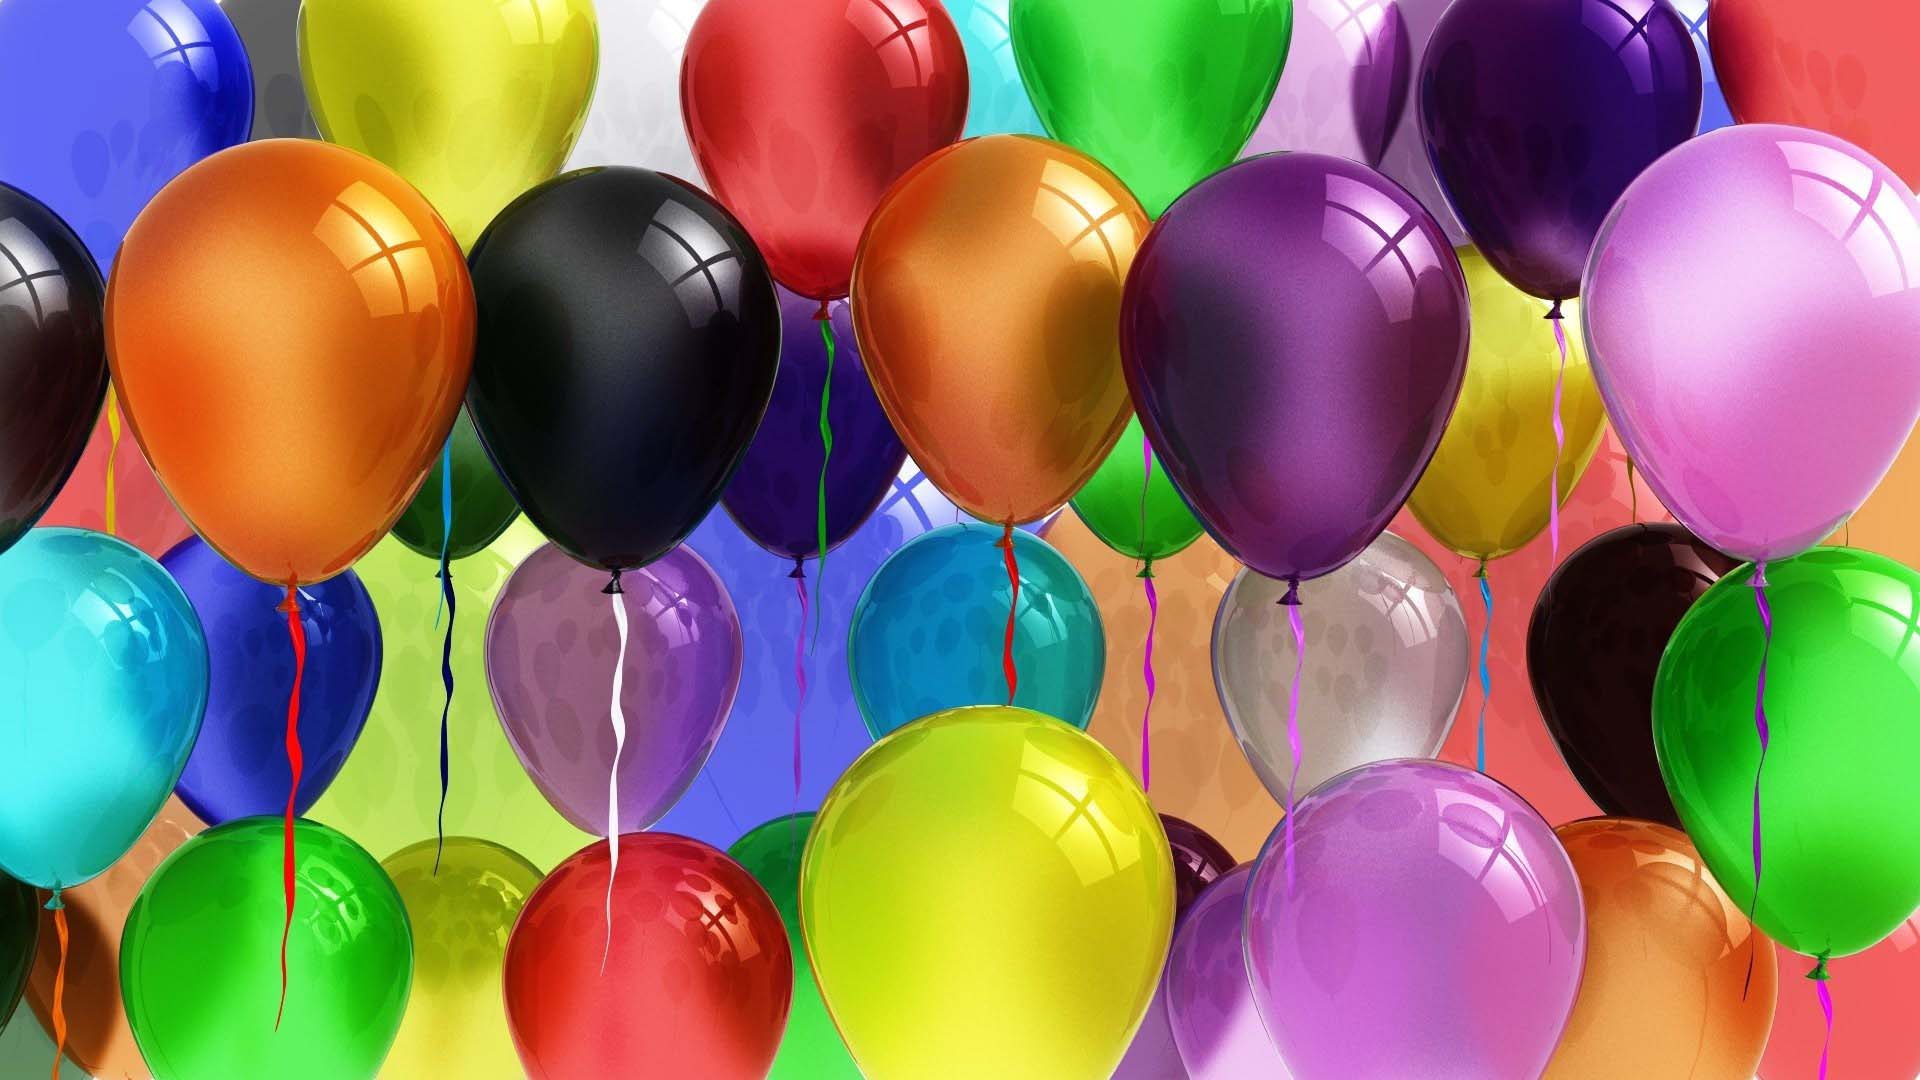 Birthday Balloons Colorful Wallpapers for free – Daily Backgrounds ...